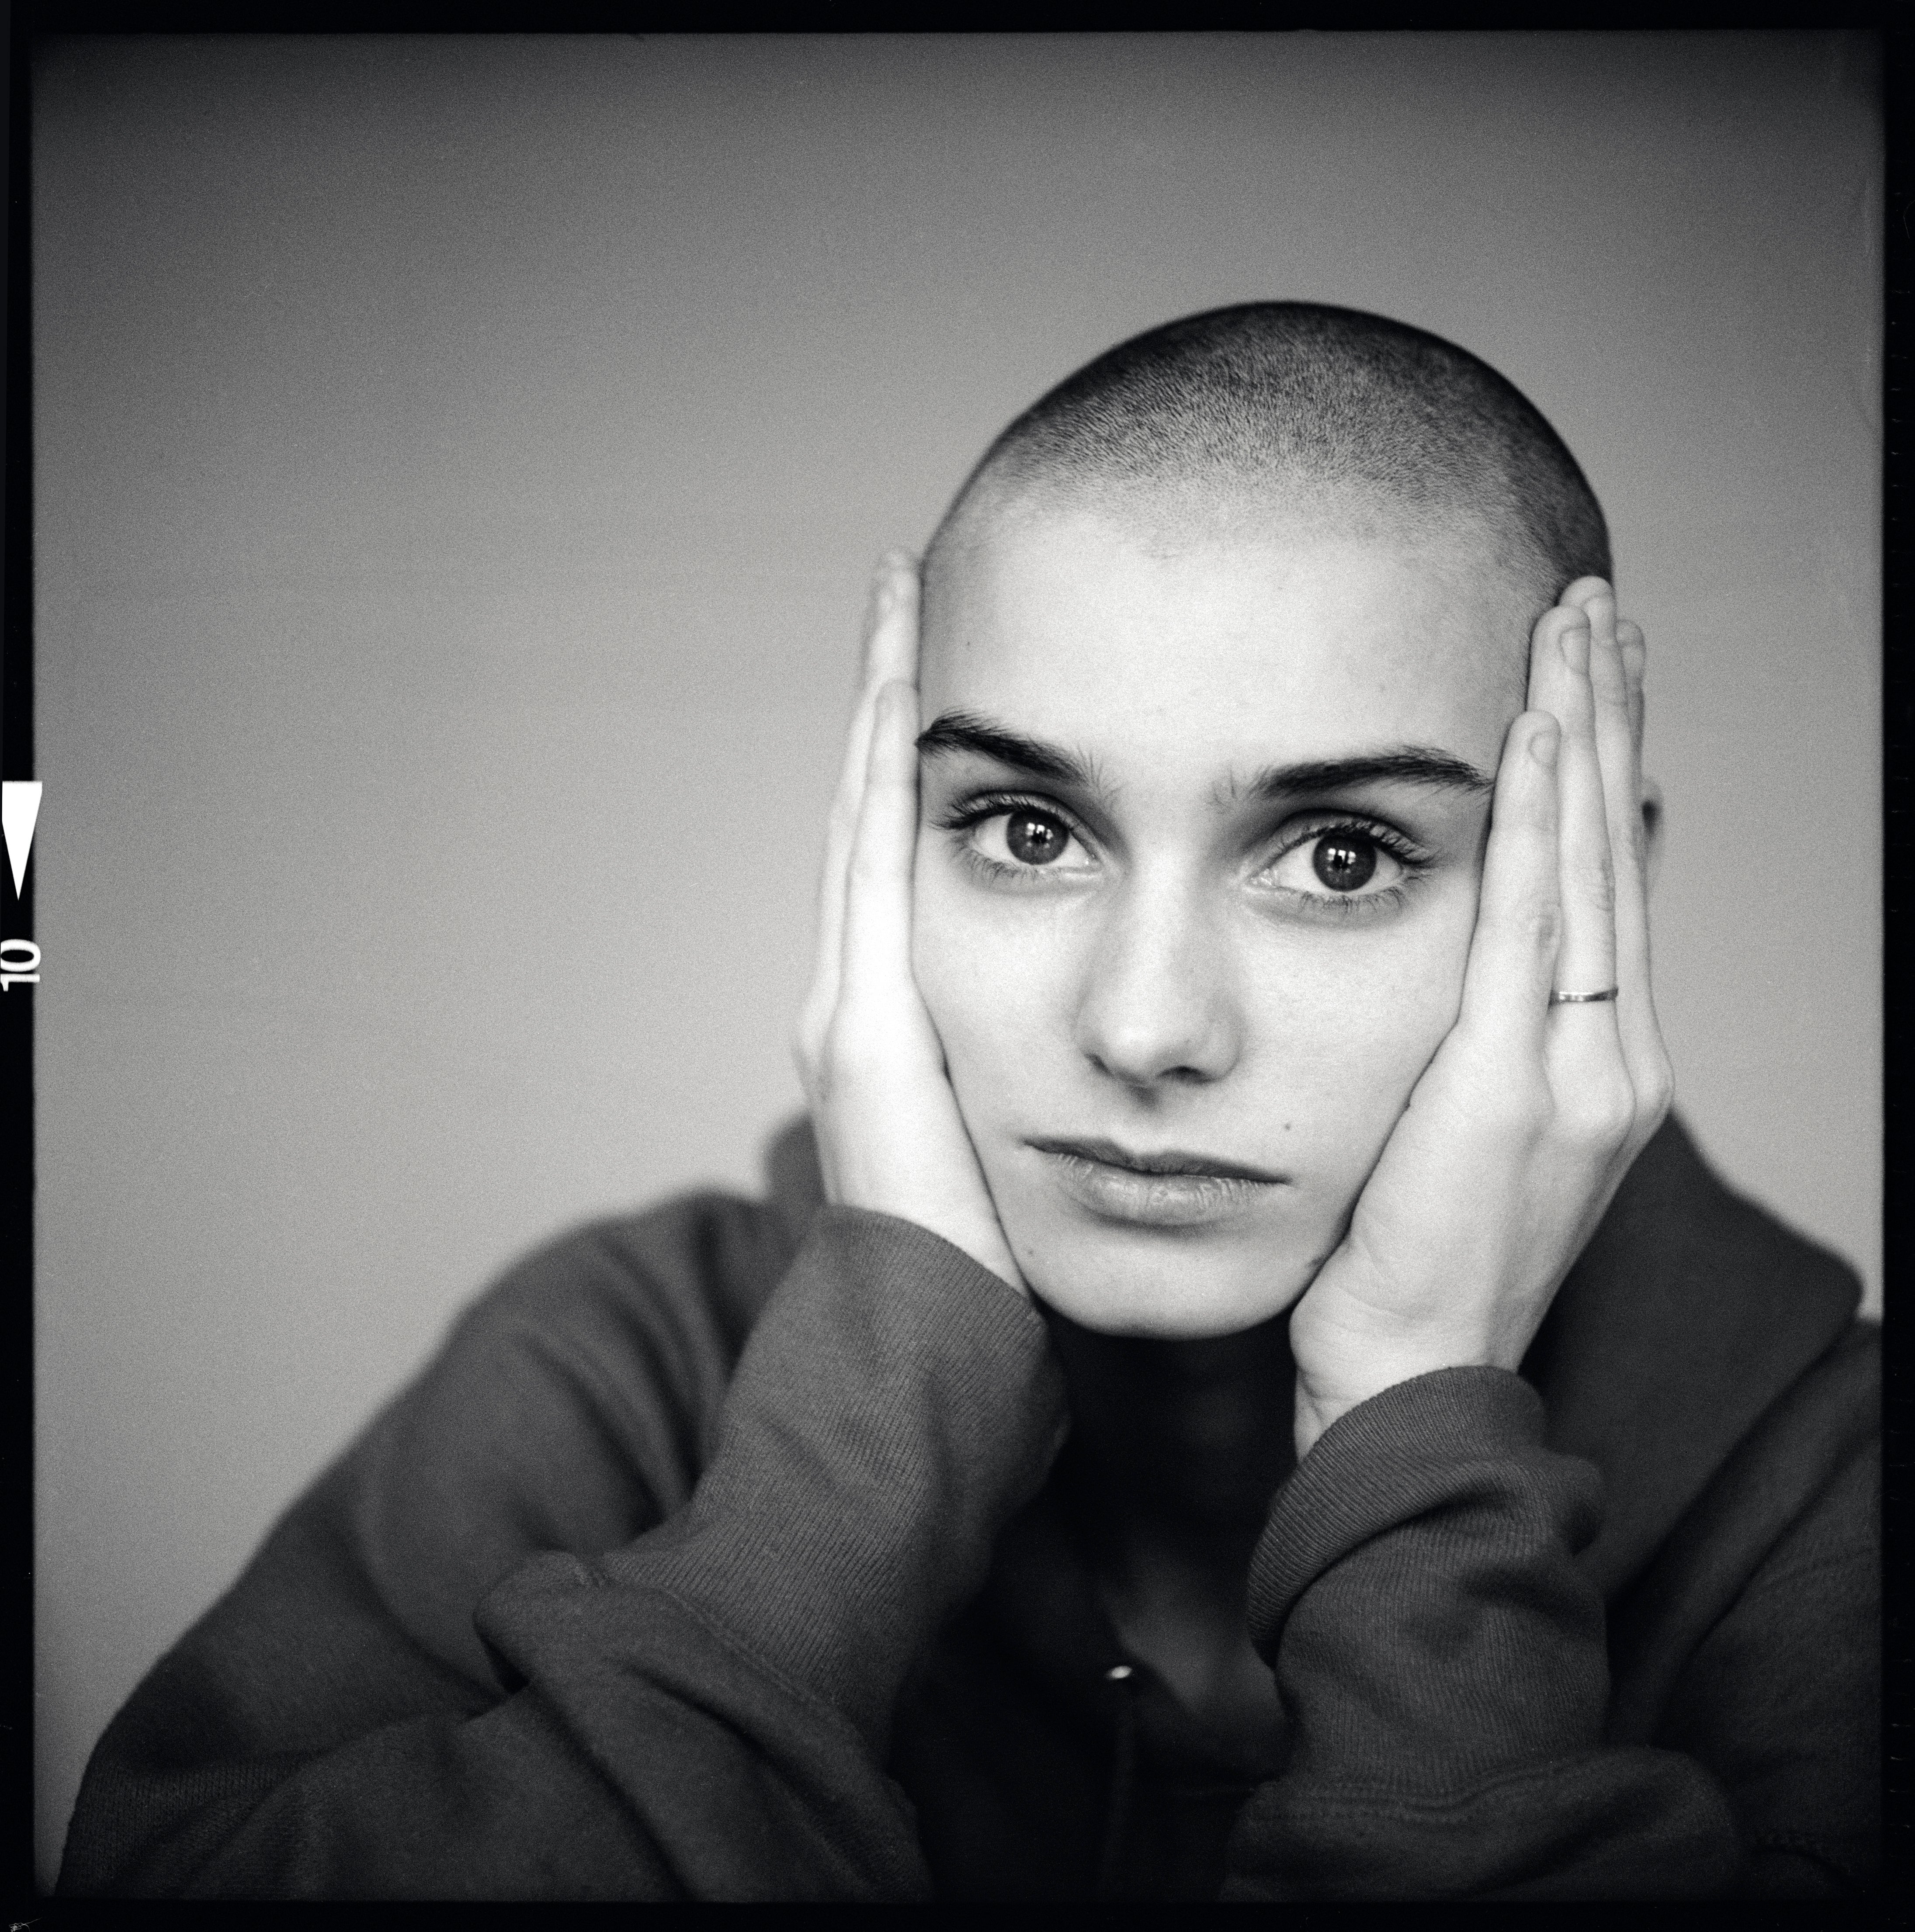 Andrew Catlin’s photo of a 21-year-old Sinead O’Connor